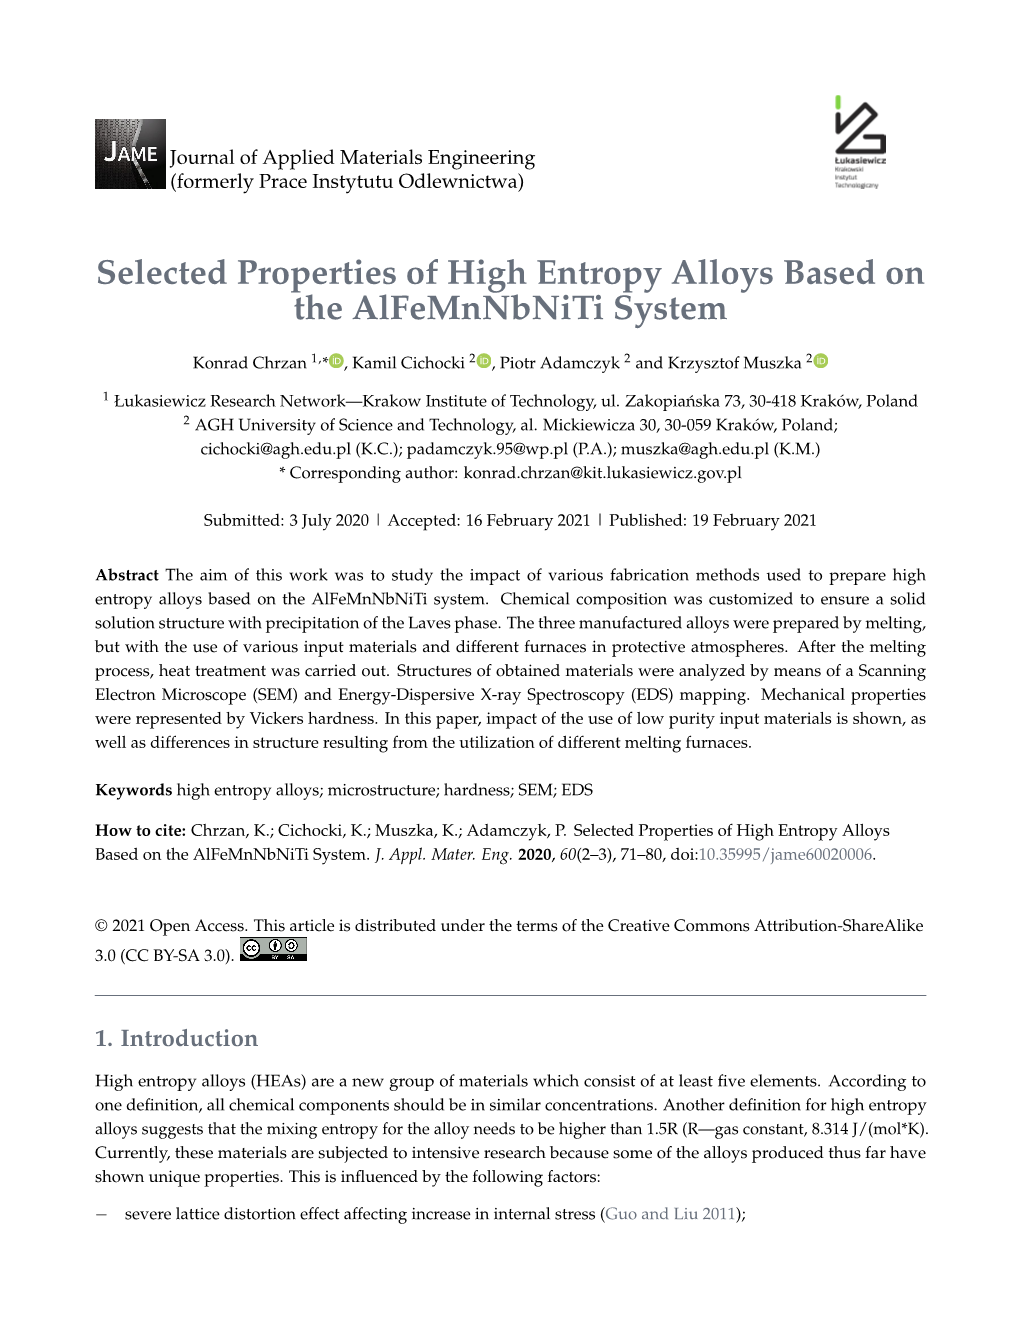 Selected Properties of High Entropy Alloys Based on the Alfemnnbniti System